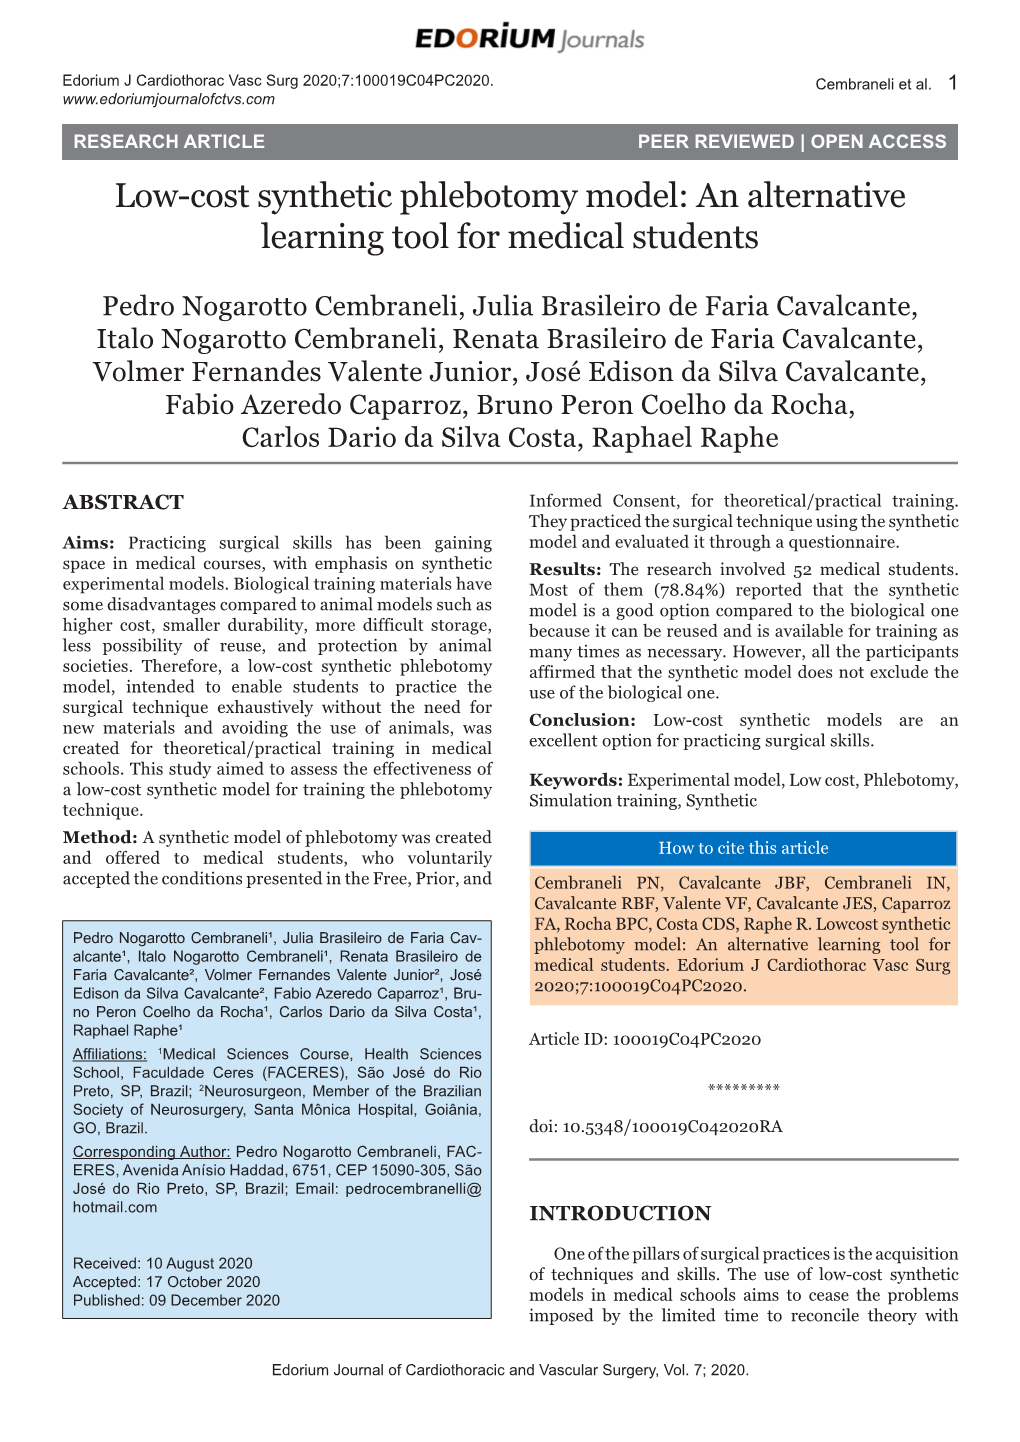 Low-Cost Synthetic Phlebotomy Model: an Alternative Learning Tool for Medical Students